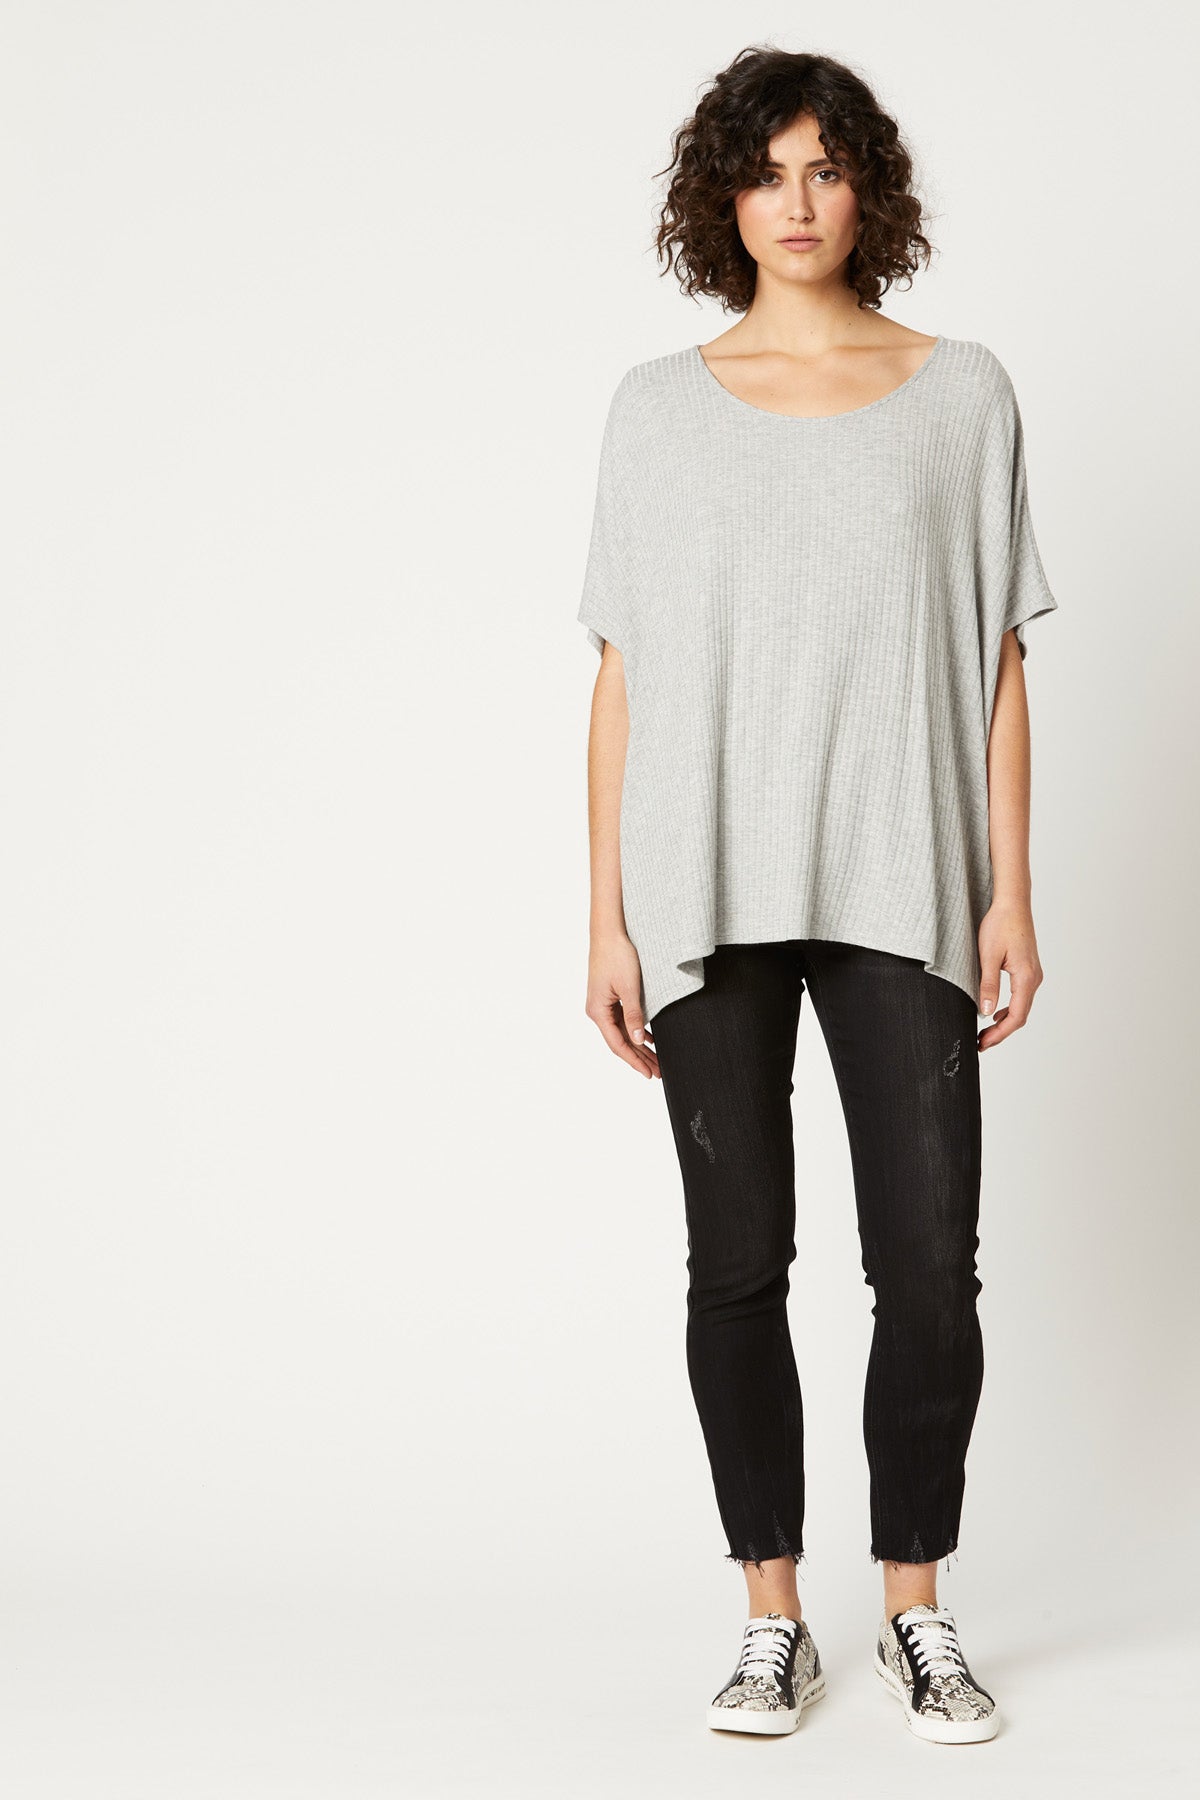 Urban Top - Marle - eb&ive Clothing - Top One Size Casual